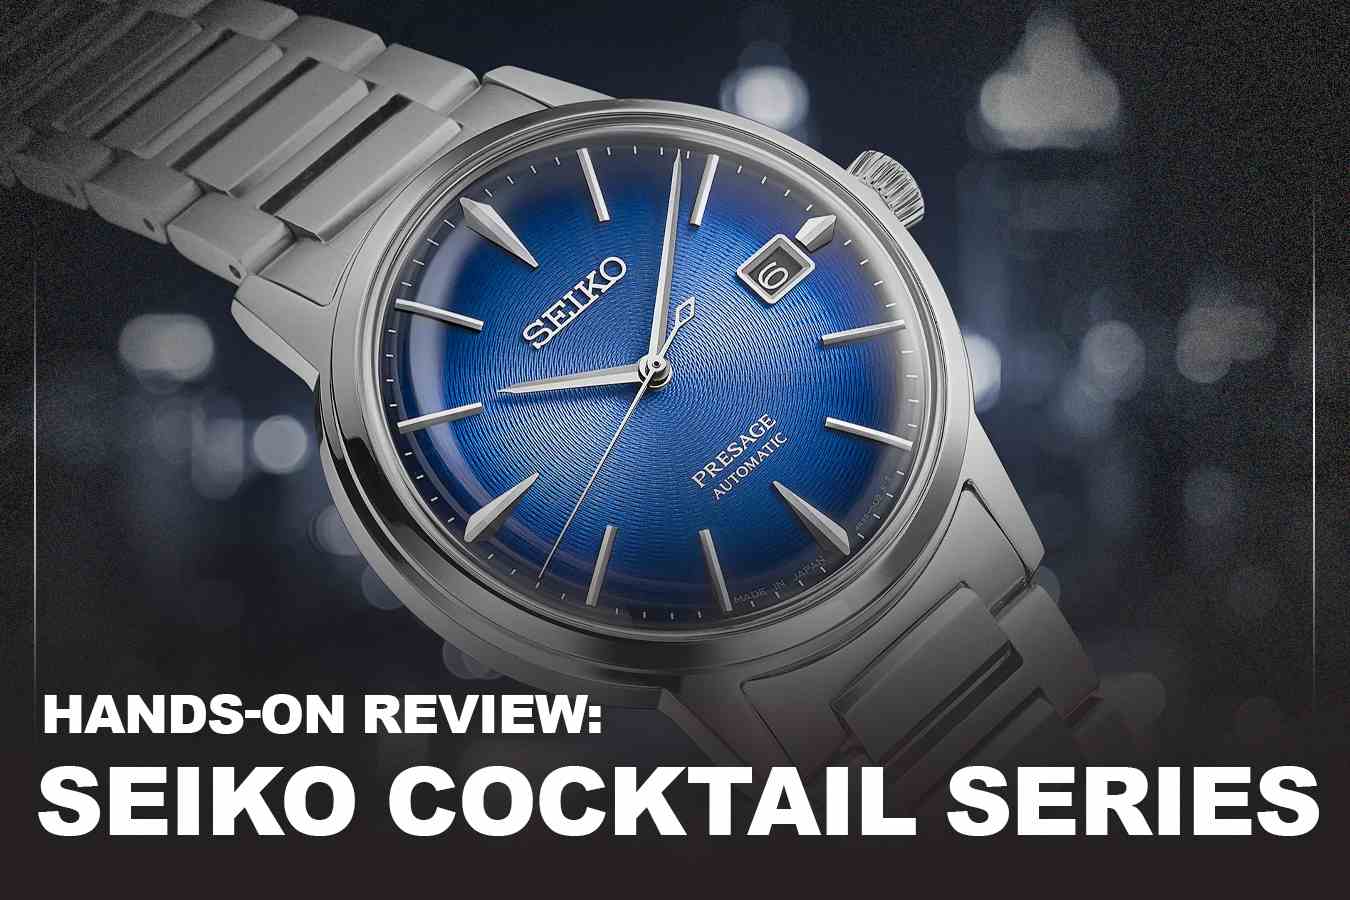 Hands-on Review Seiko Cocktail series